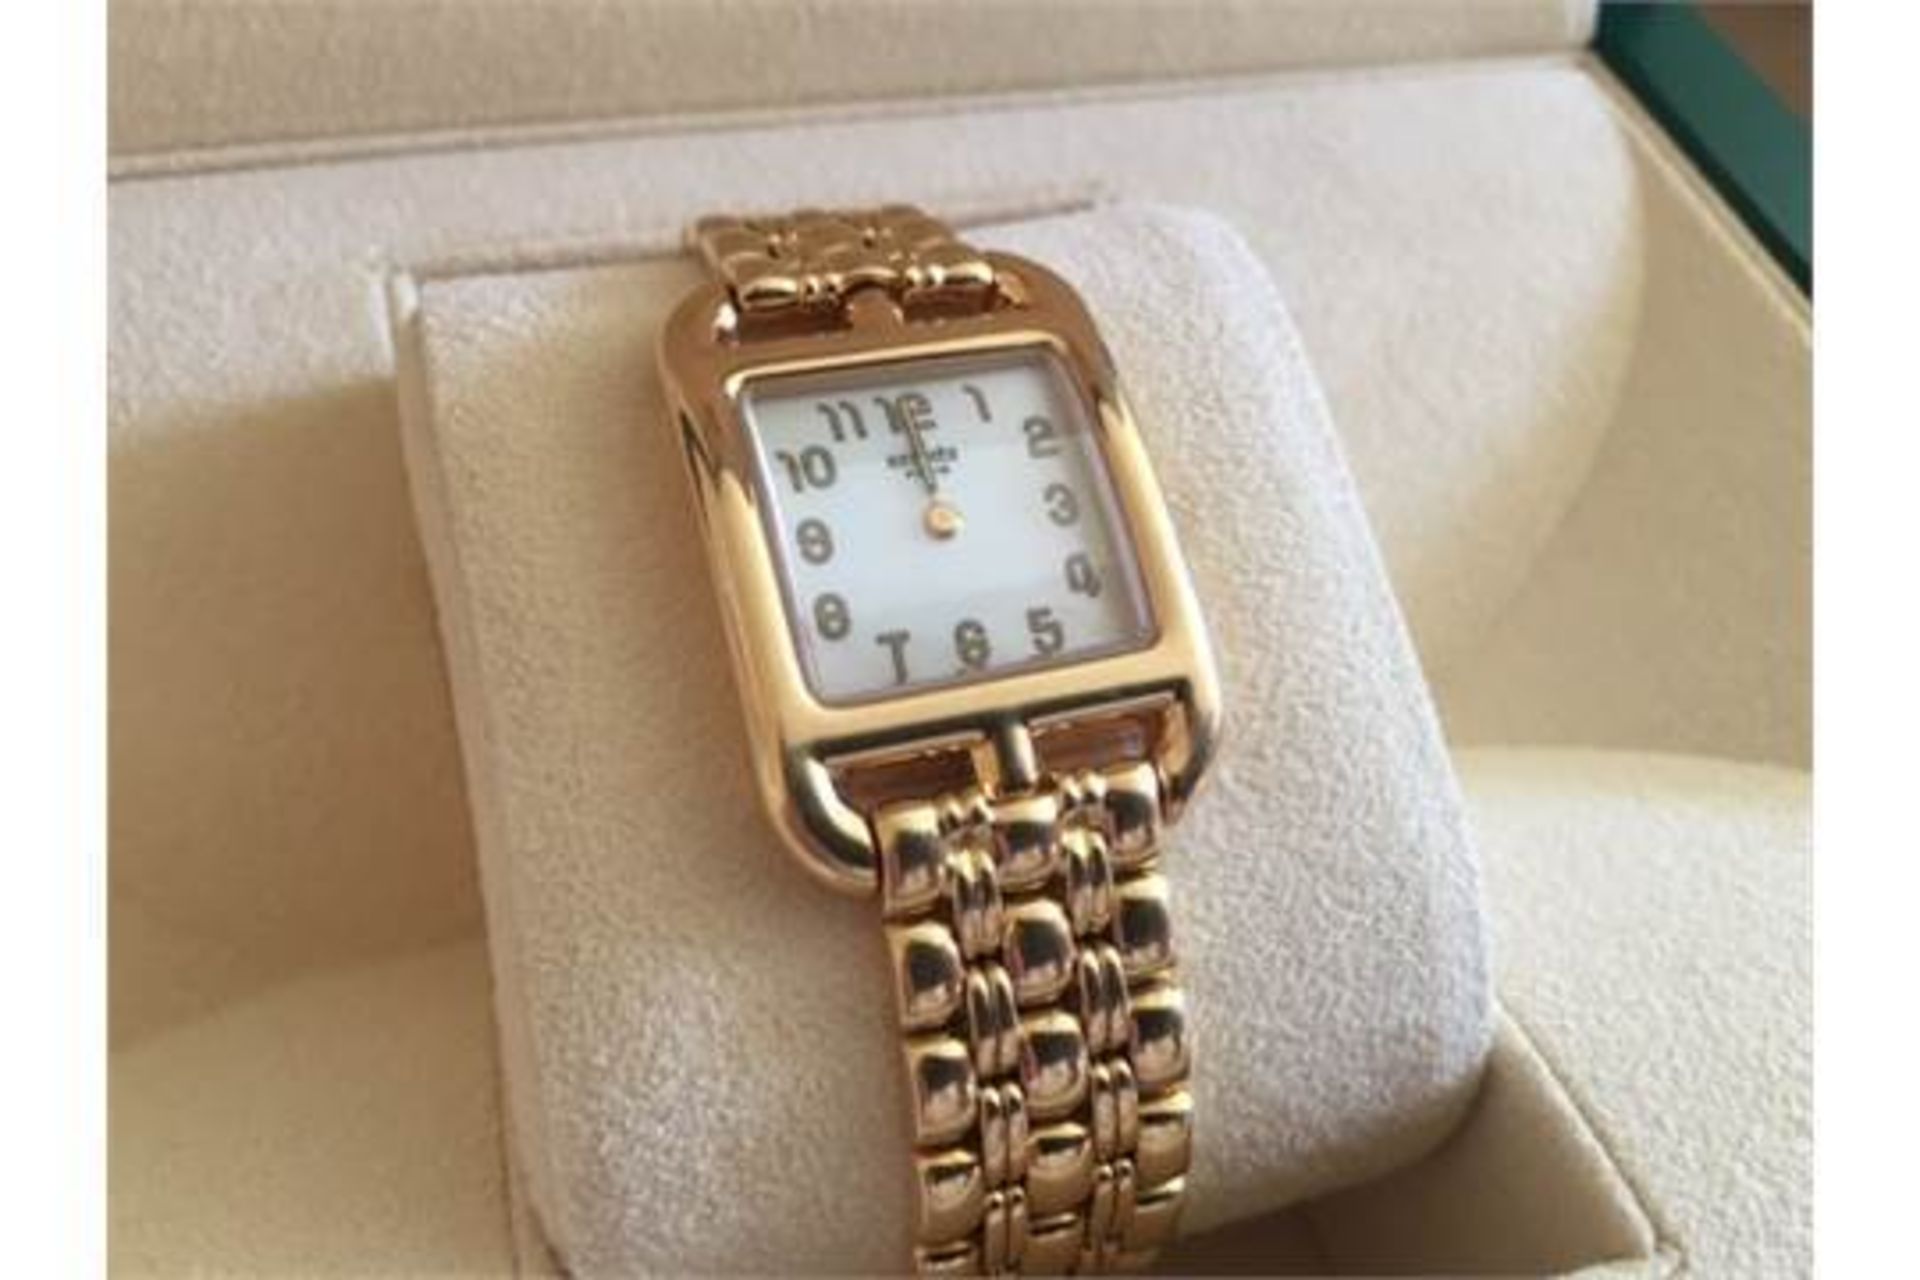 2010 HERMES 18ct SOLID GOLD CAPE COD WATCH WITH MOTHER OF PEARL FACE COST £23,475 NEW WATCH AND